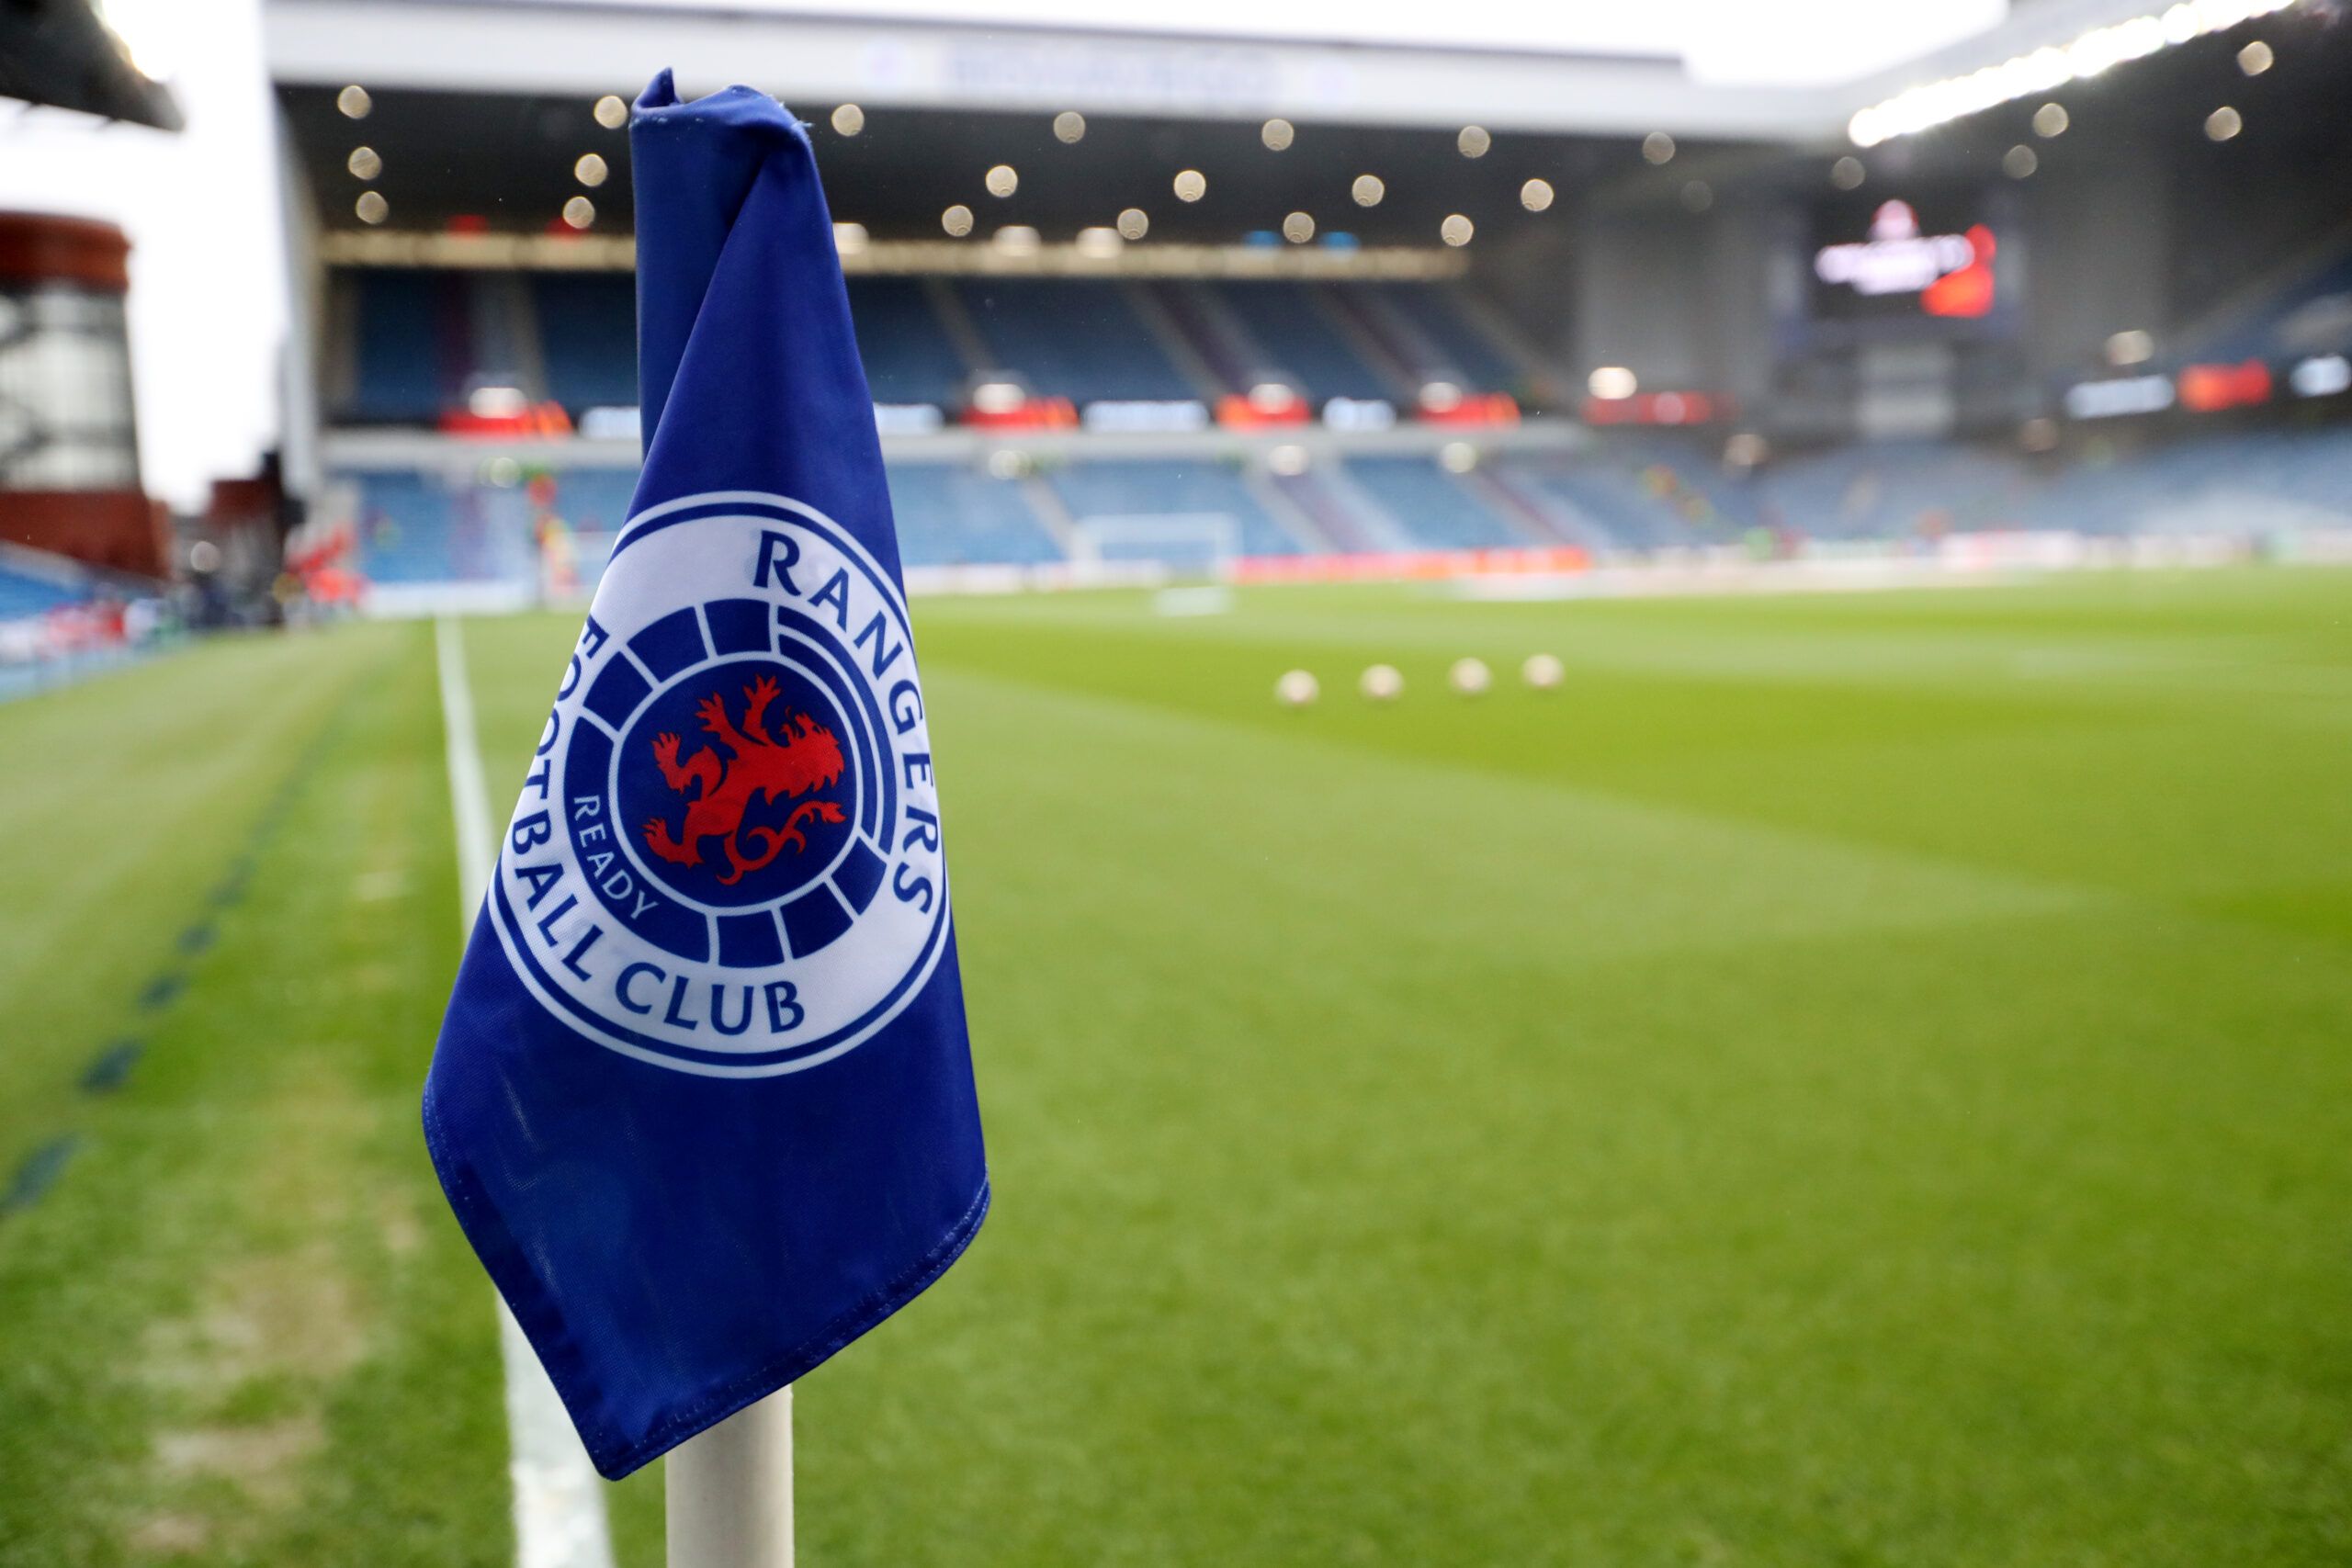 Soccer Football - Europa League - Semi Final - Second Leg - Rangers v RB Leipzig - Ibrox, Glasgow, Scotland, Britain - May 5, 2022 General view of a corner flag inside the stadium before the match REUTERS/Russell Cheyne